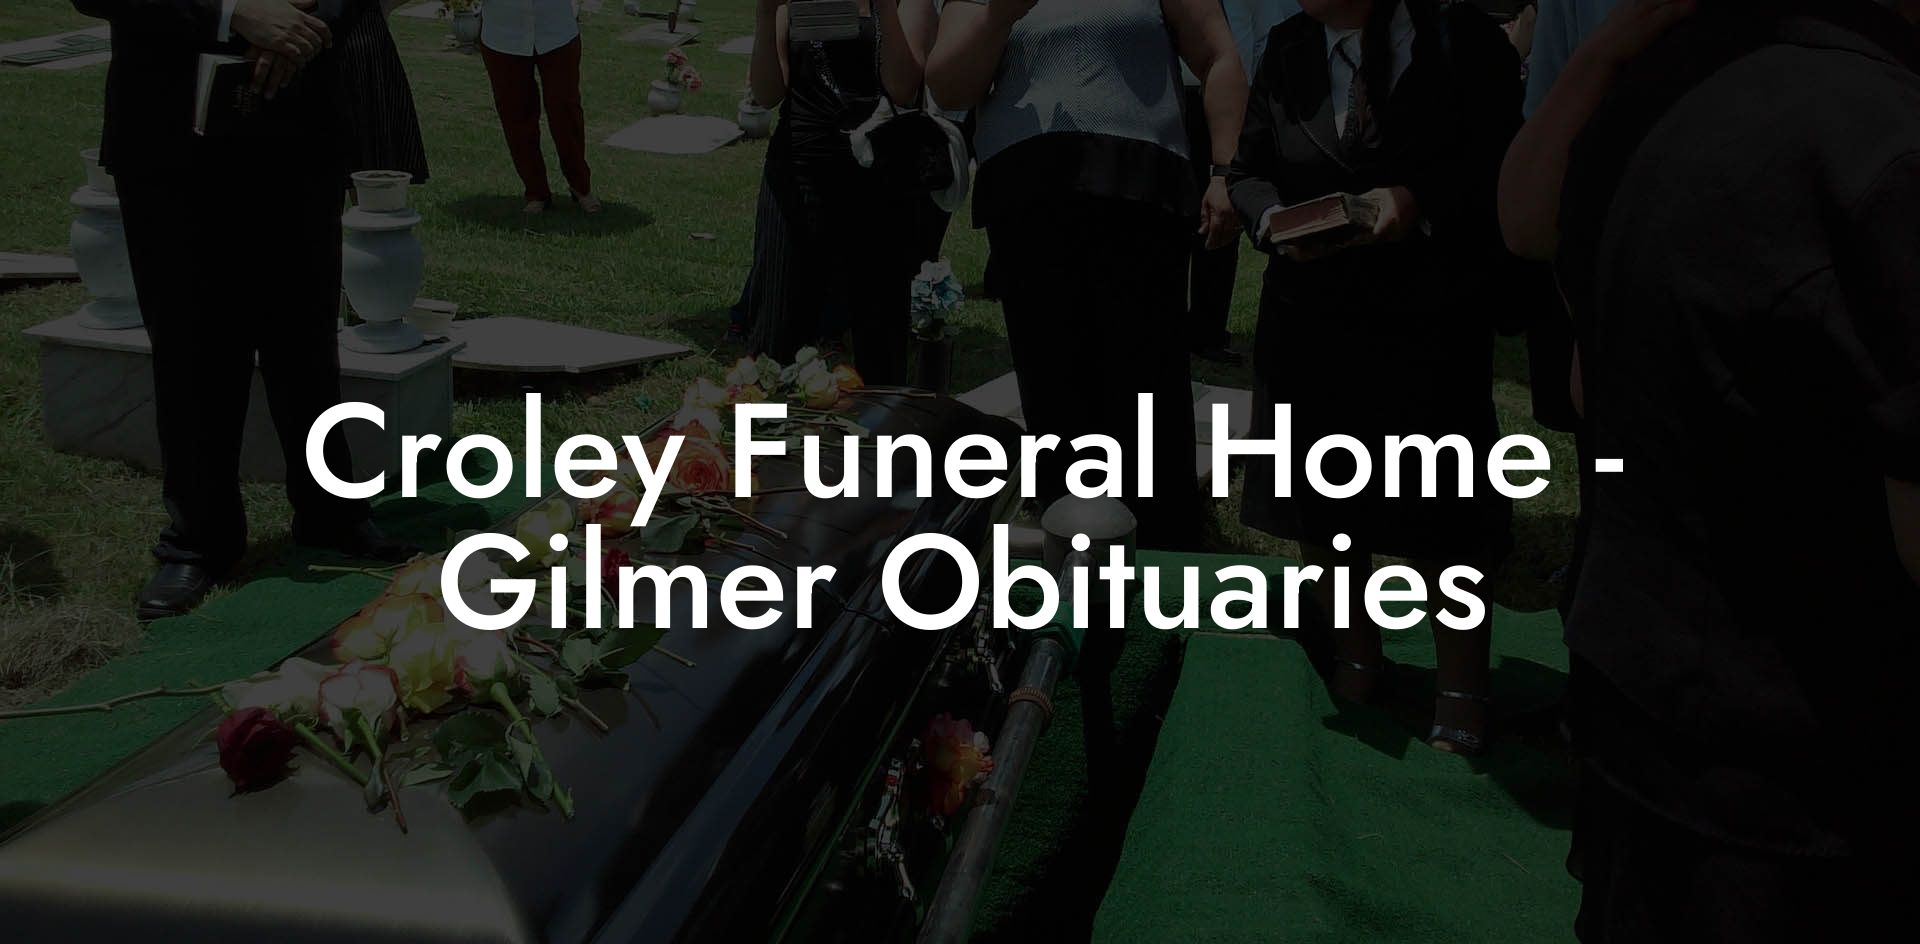 Croley Funeral Home - Gilmer Obituaries